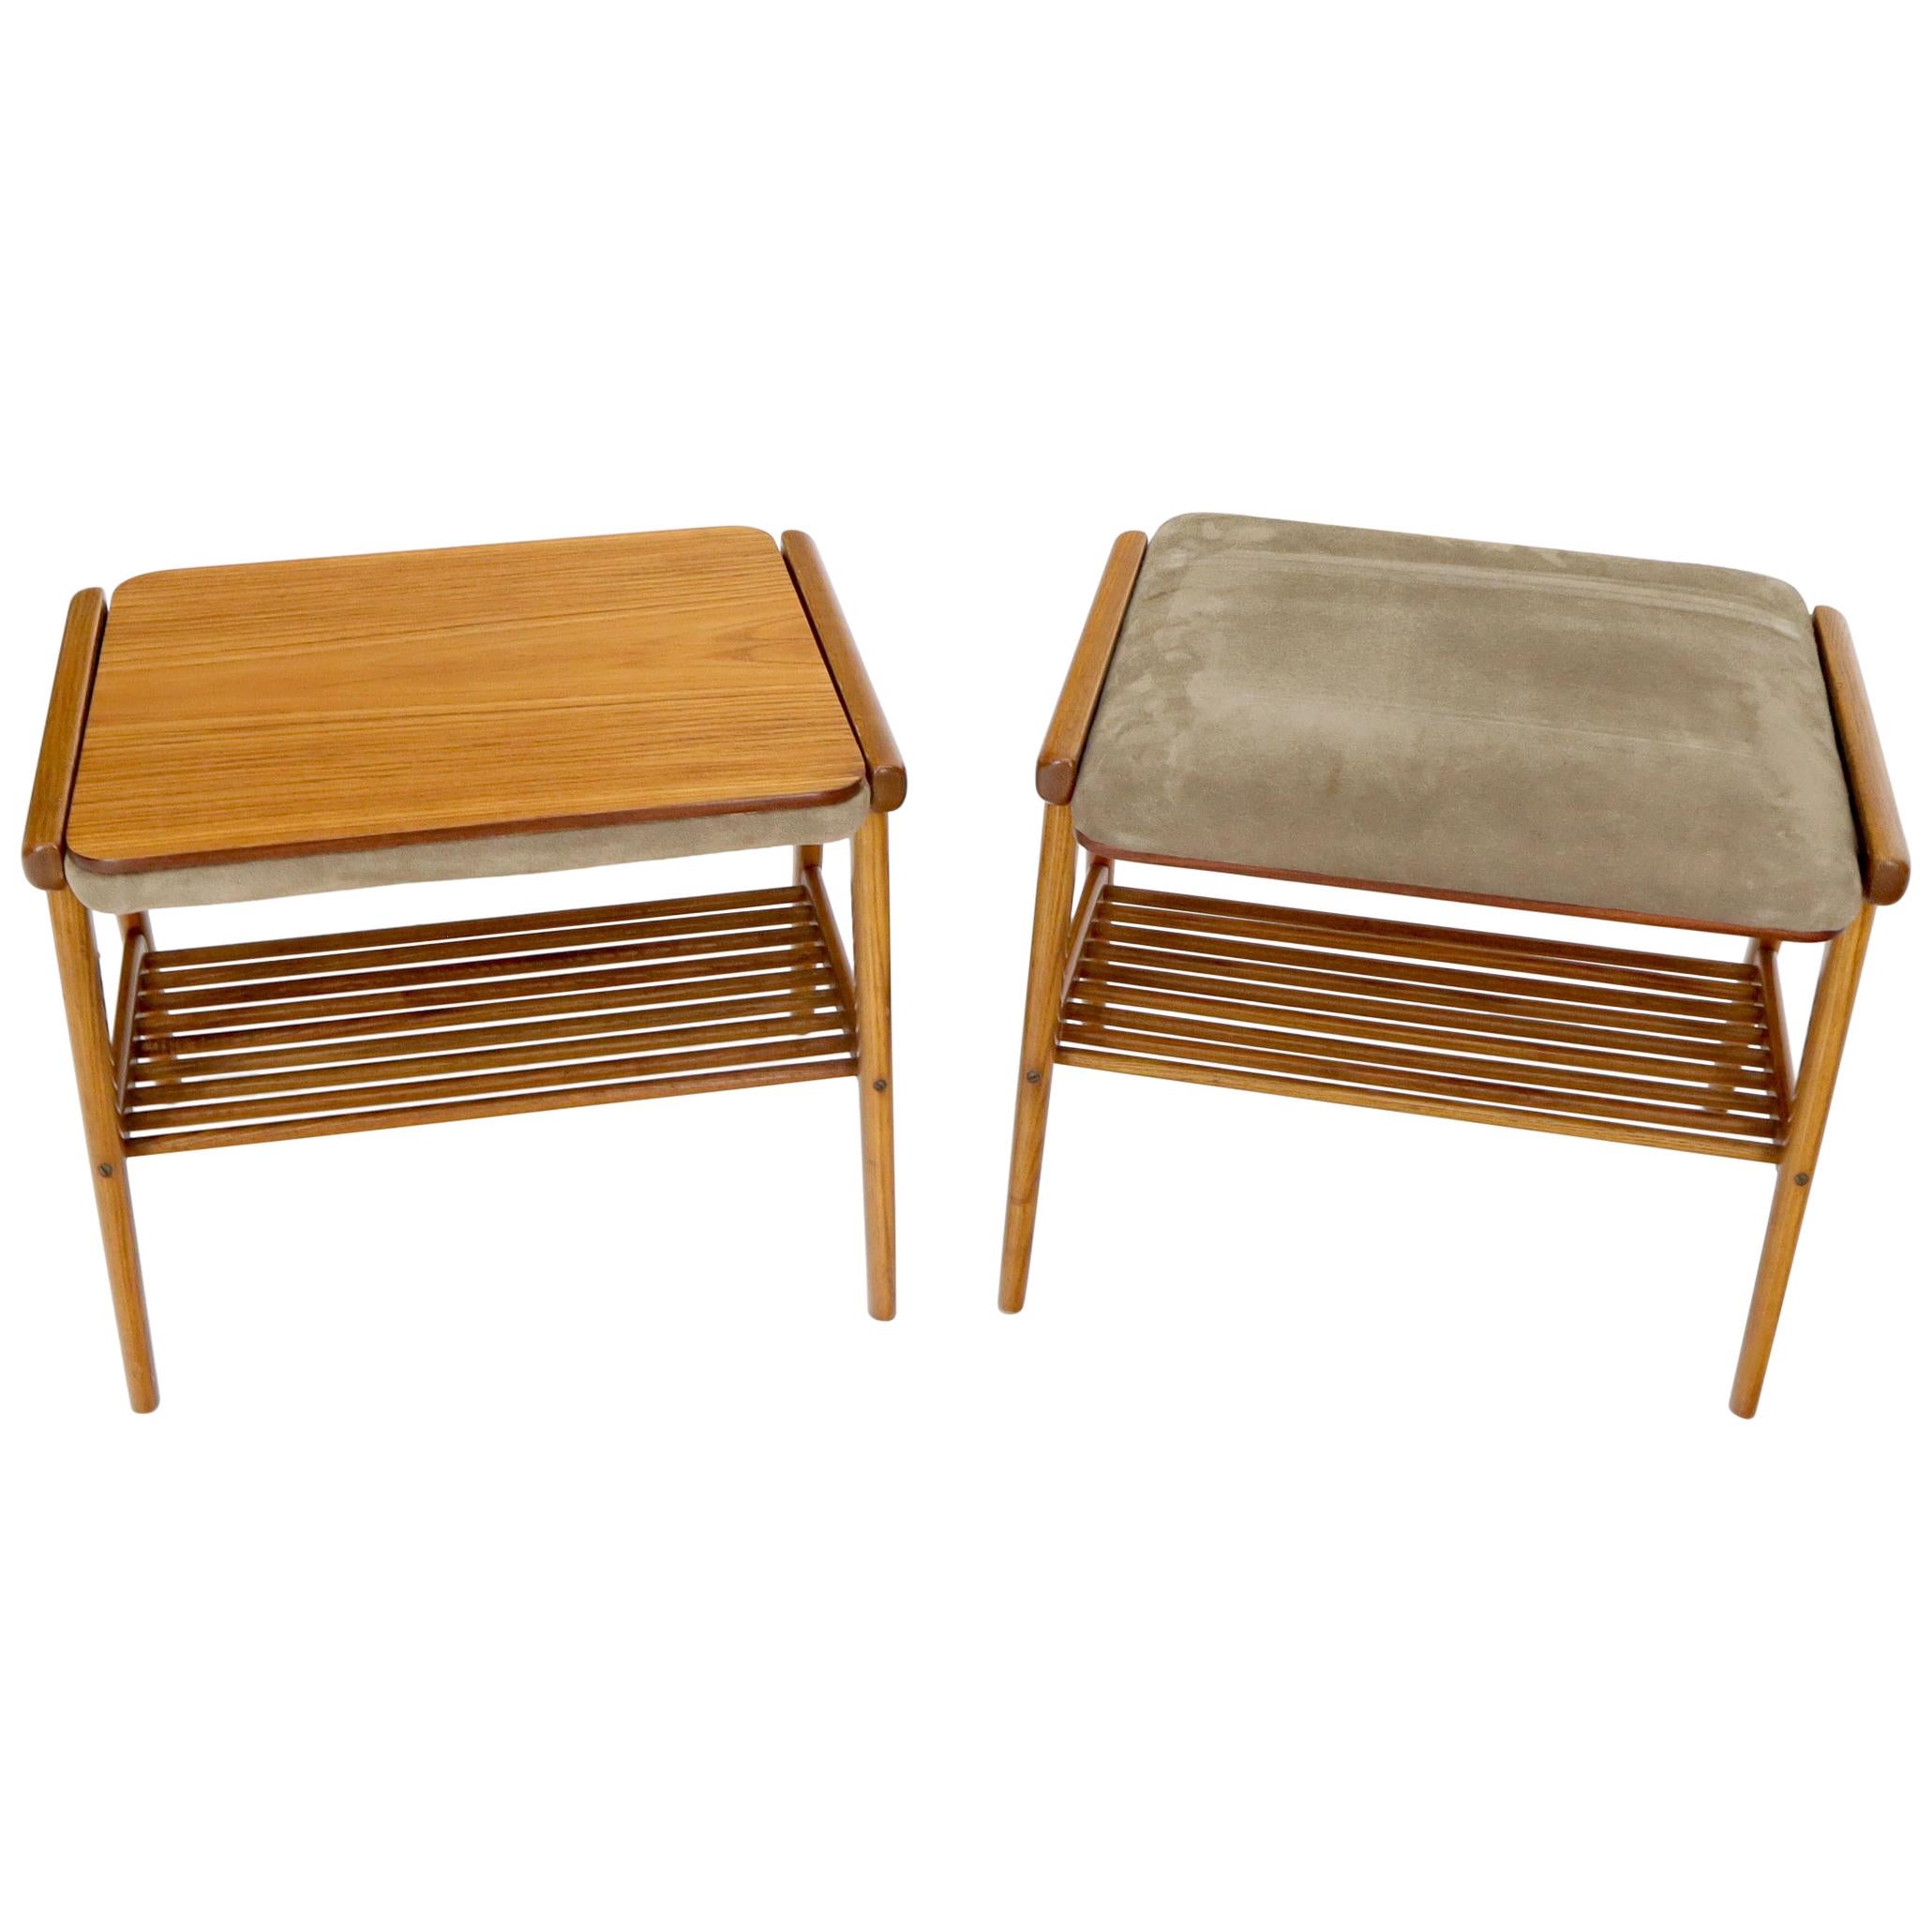 Pair of Danish Teak Mid-Century Modern Flip Top Tables Suede Benches For Sale